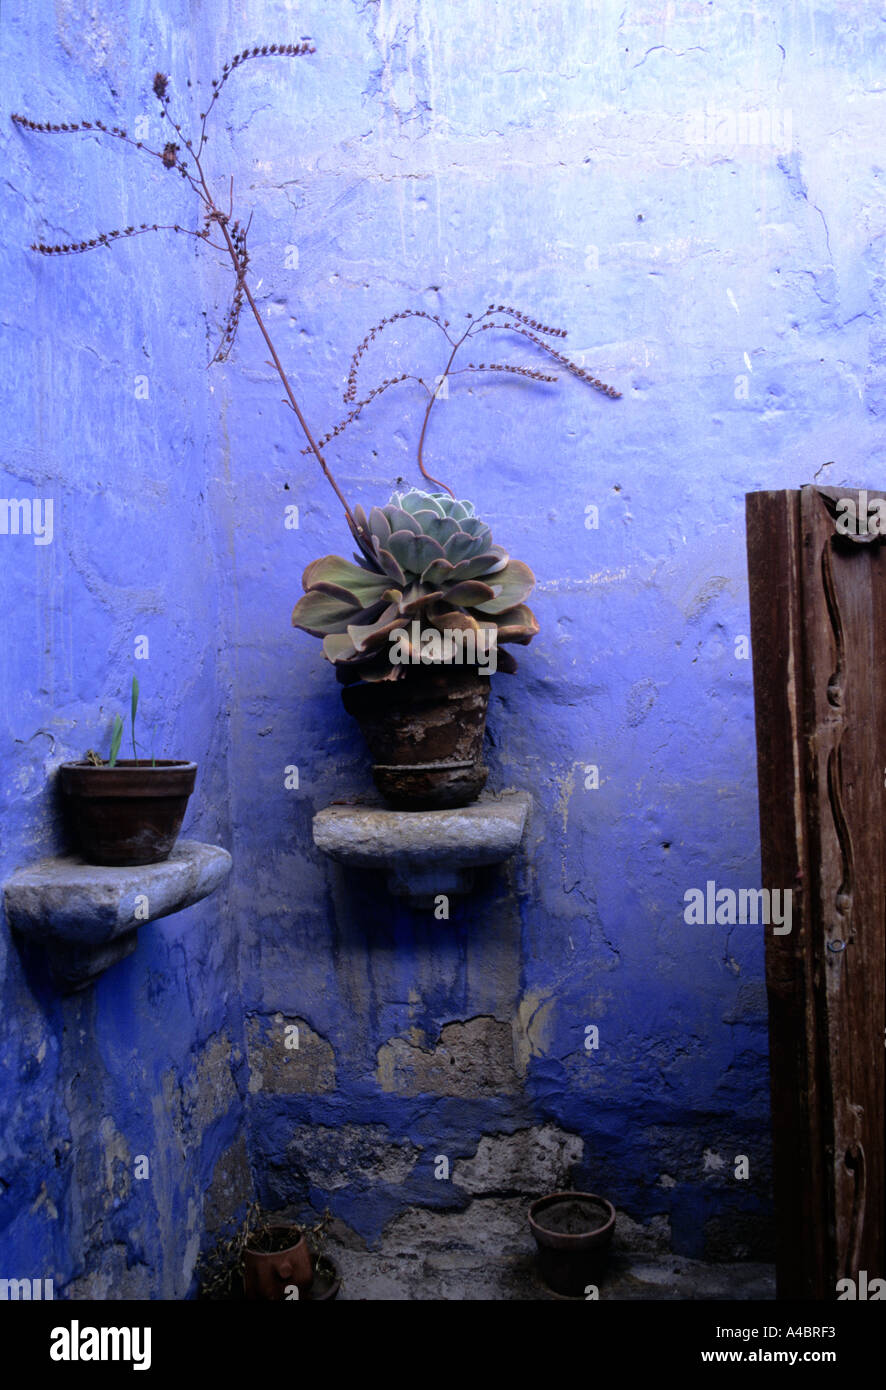 Arequipa, Peru. The Santa Catalina Monastery; plants in pots against a faded cobalt blue wall. Stock Photo